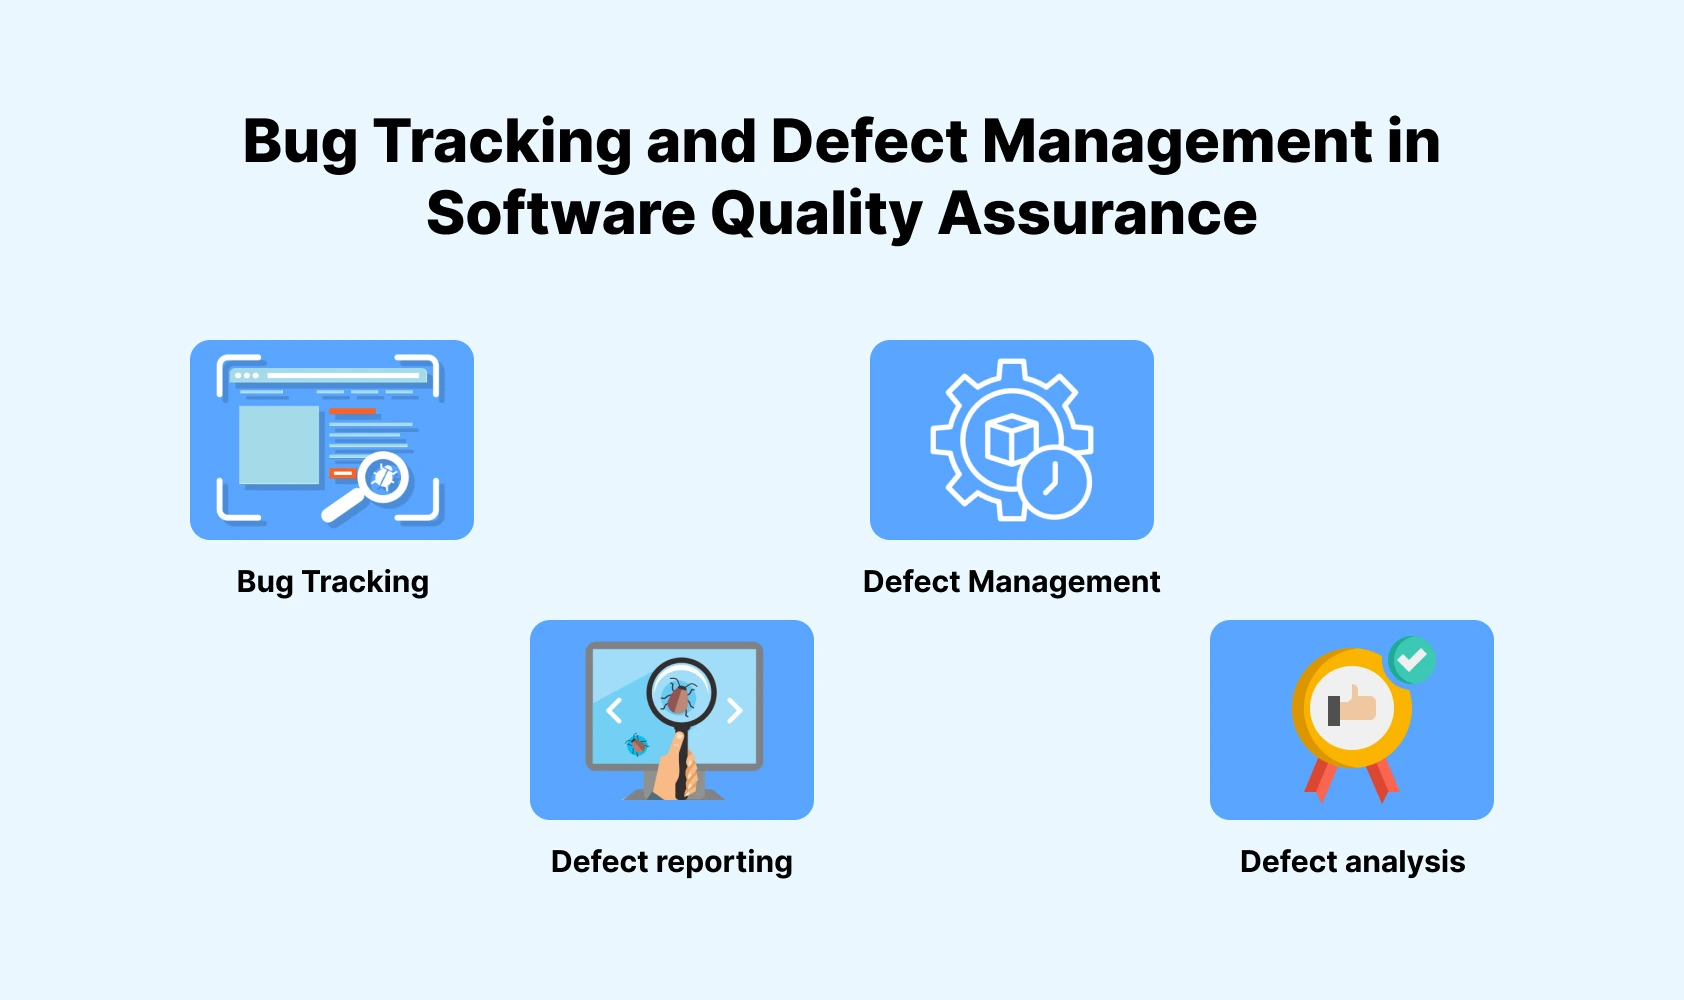 Bug Tracking and Defect Management in Software Quality